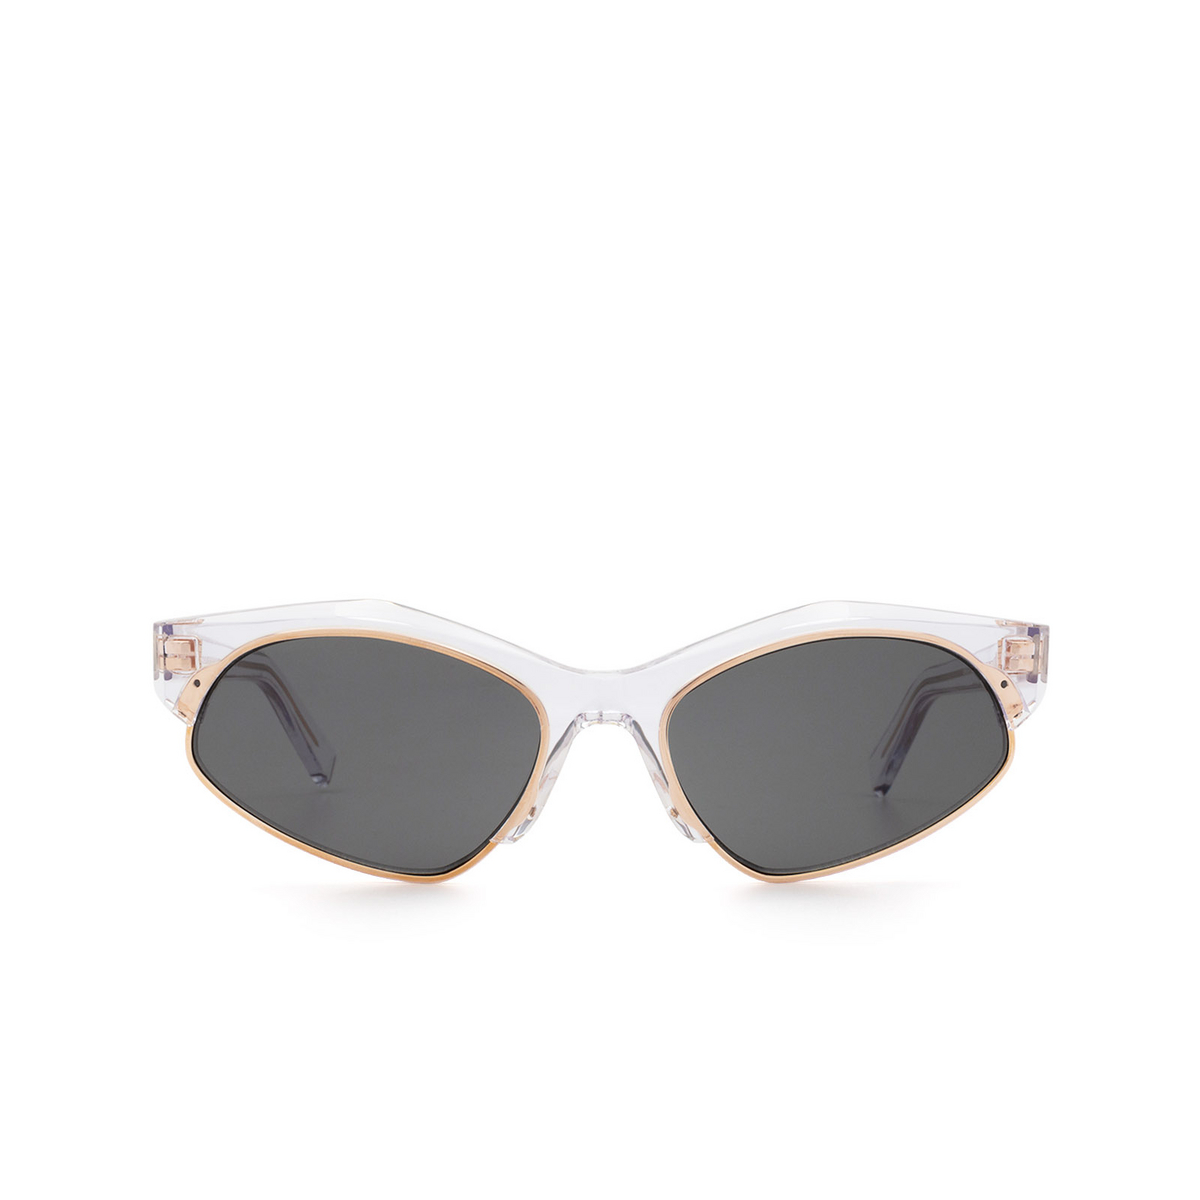 Sportmax® Irregular Sunglasses: SM0004 color Crystal 26A - front view.